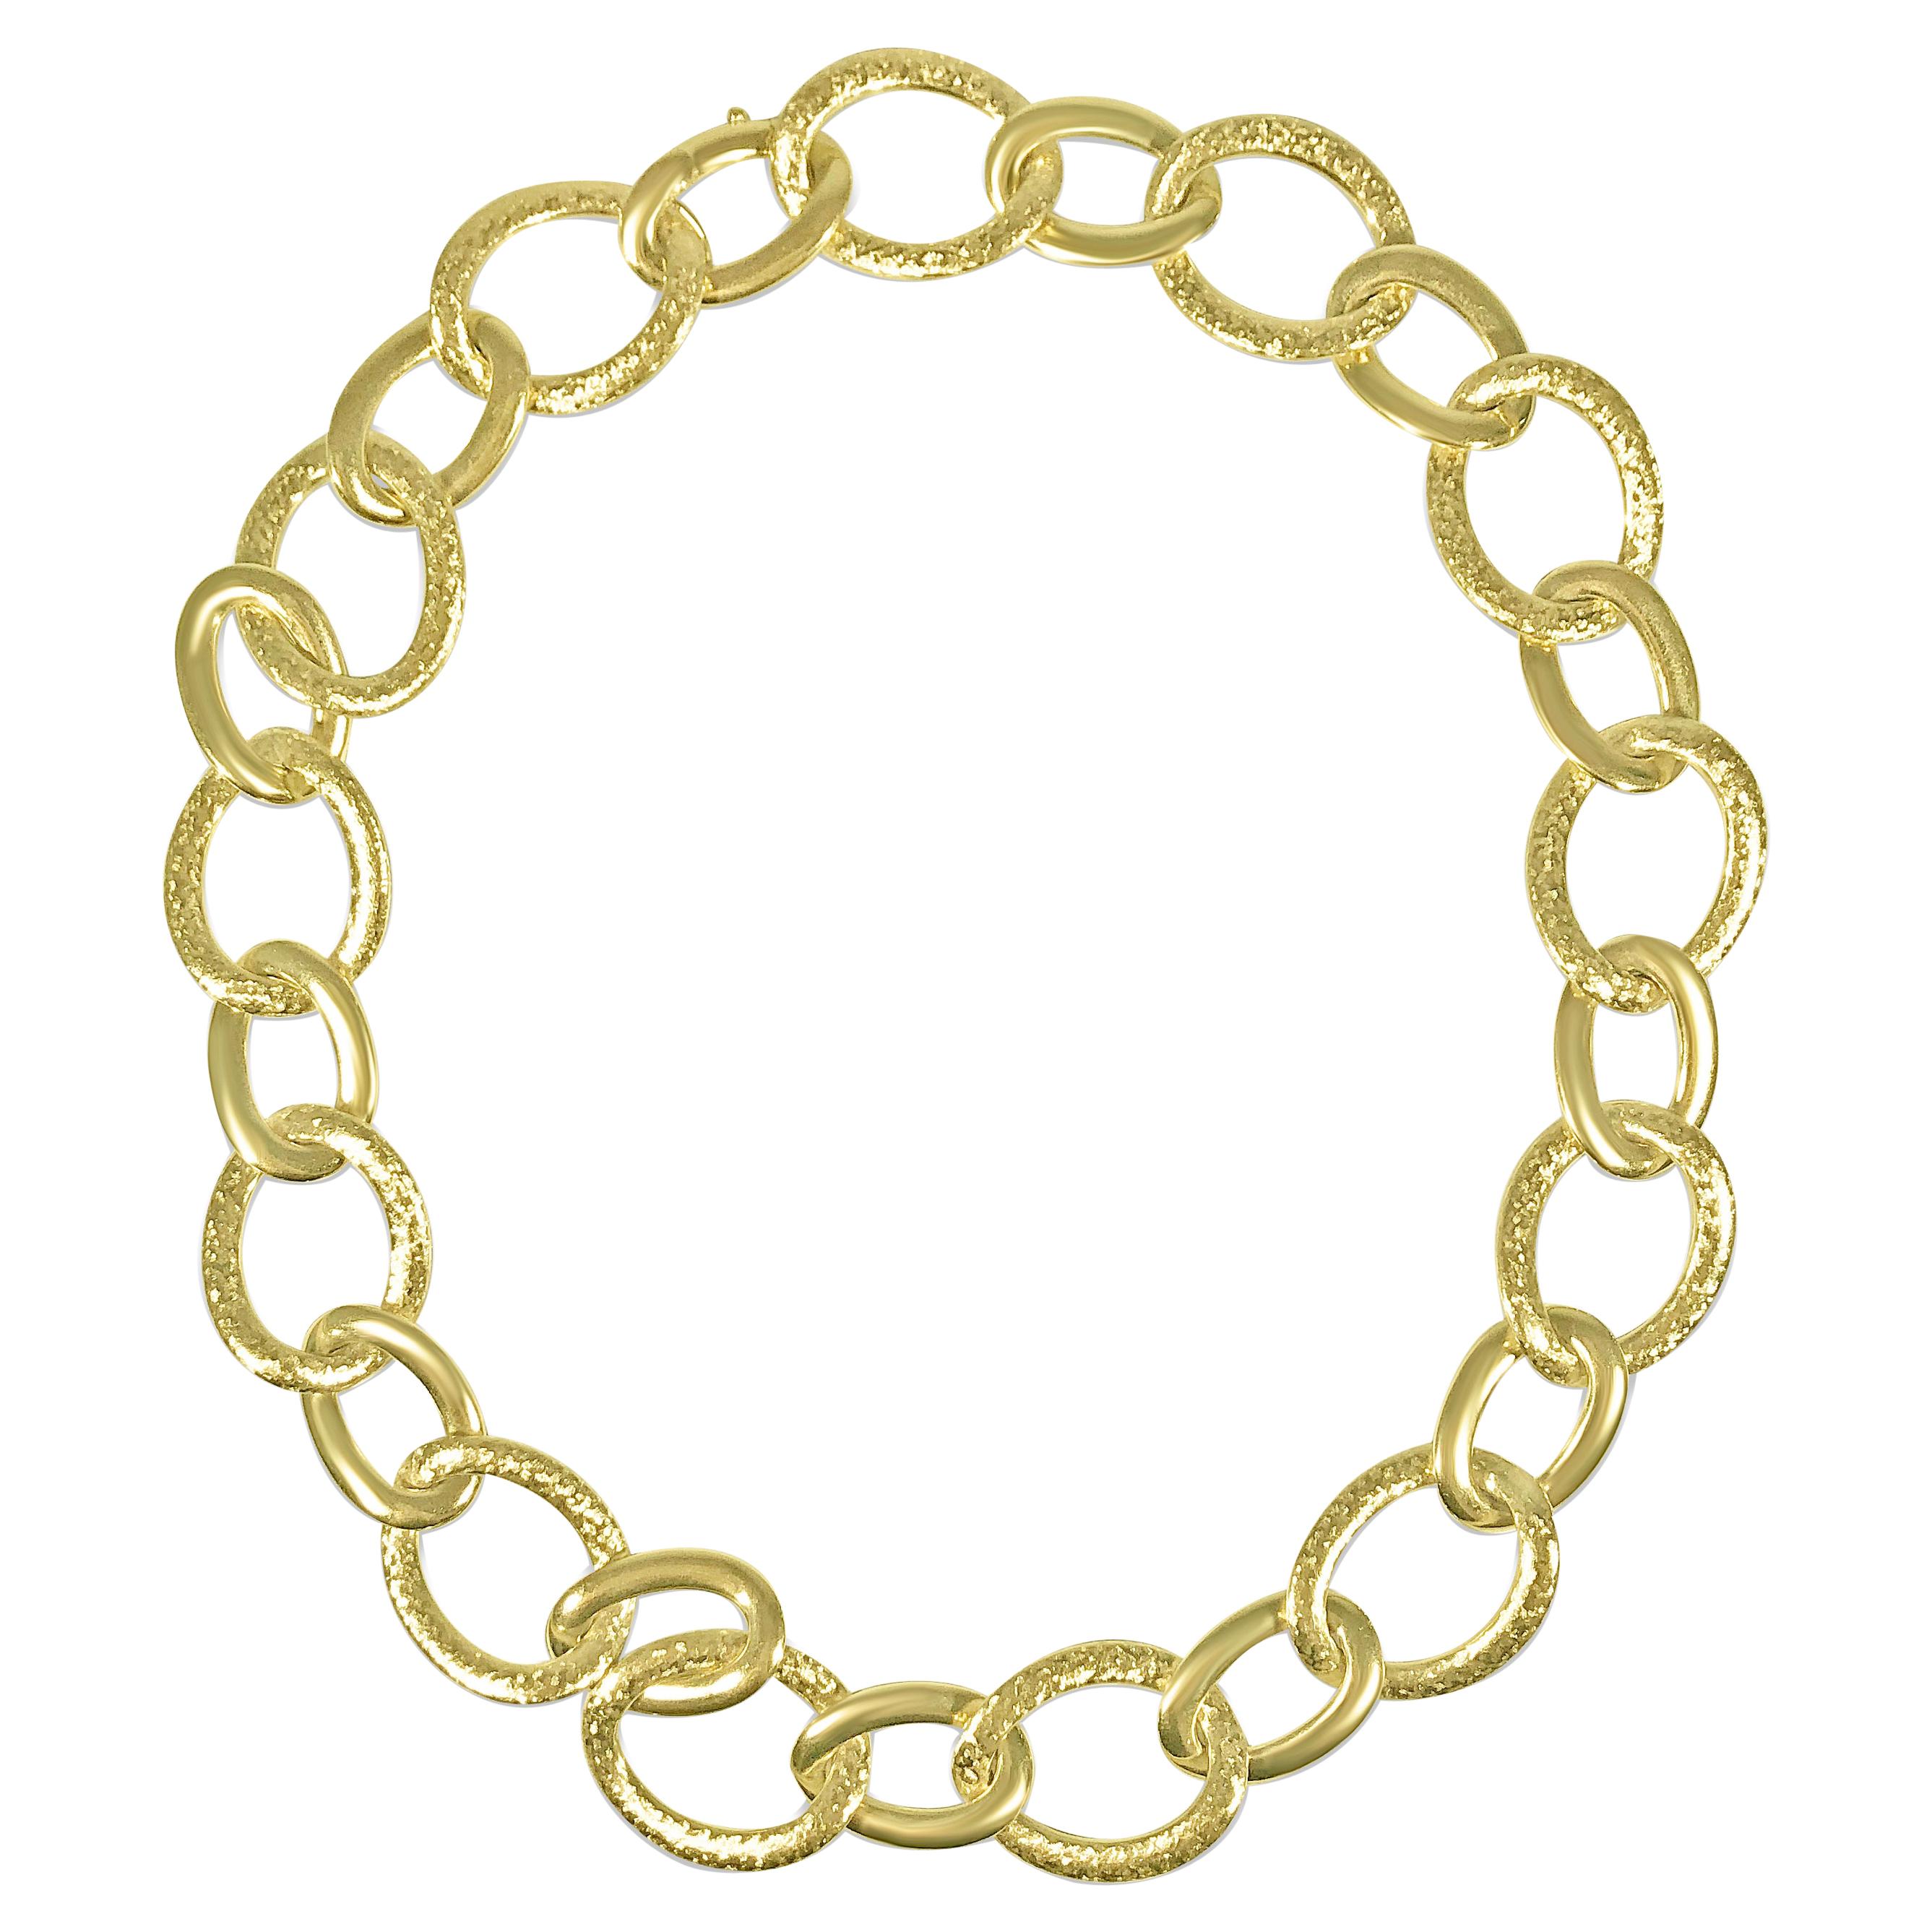 Matthia's & Claire 18k Yellow Gold Hammered Links Necklace